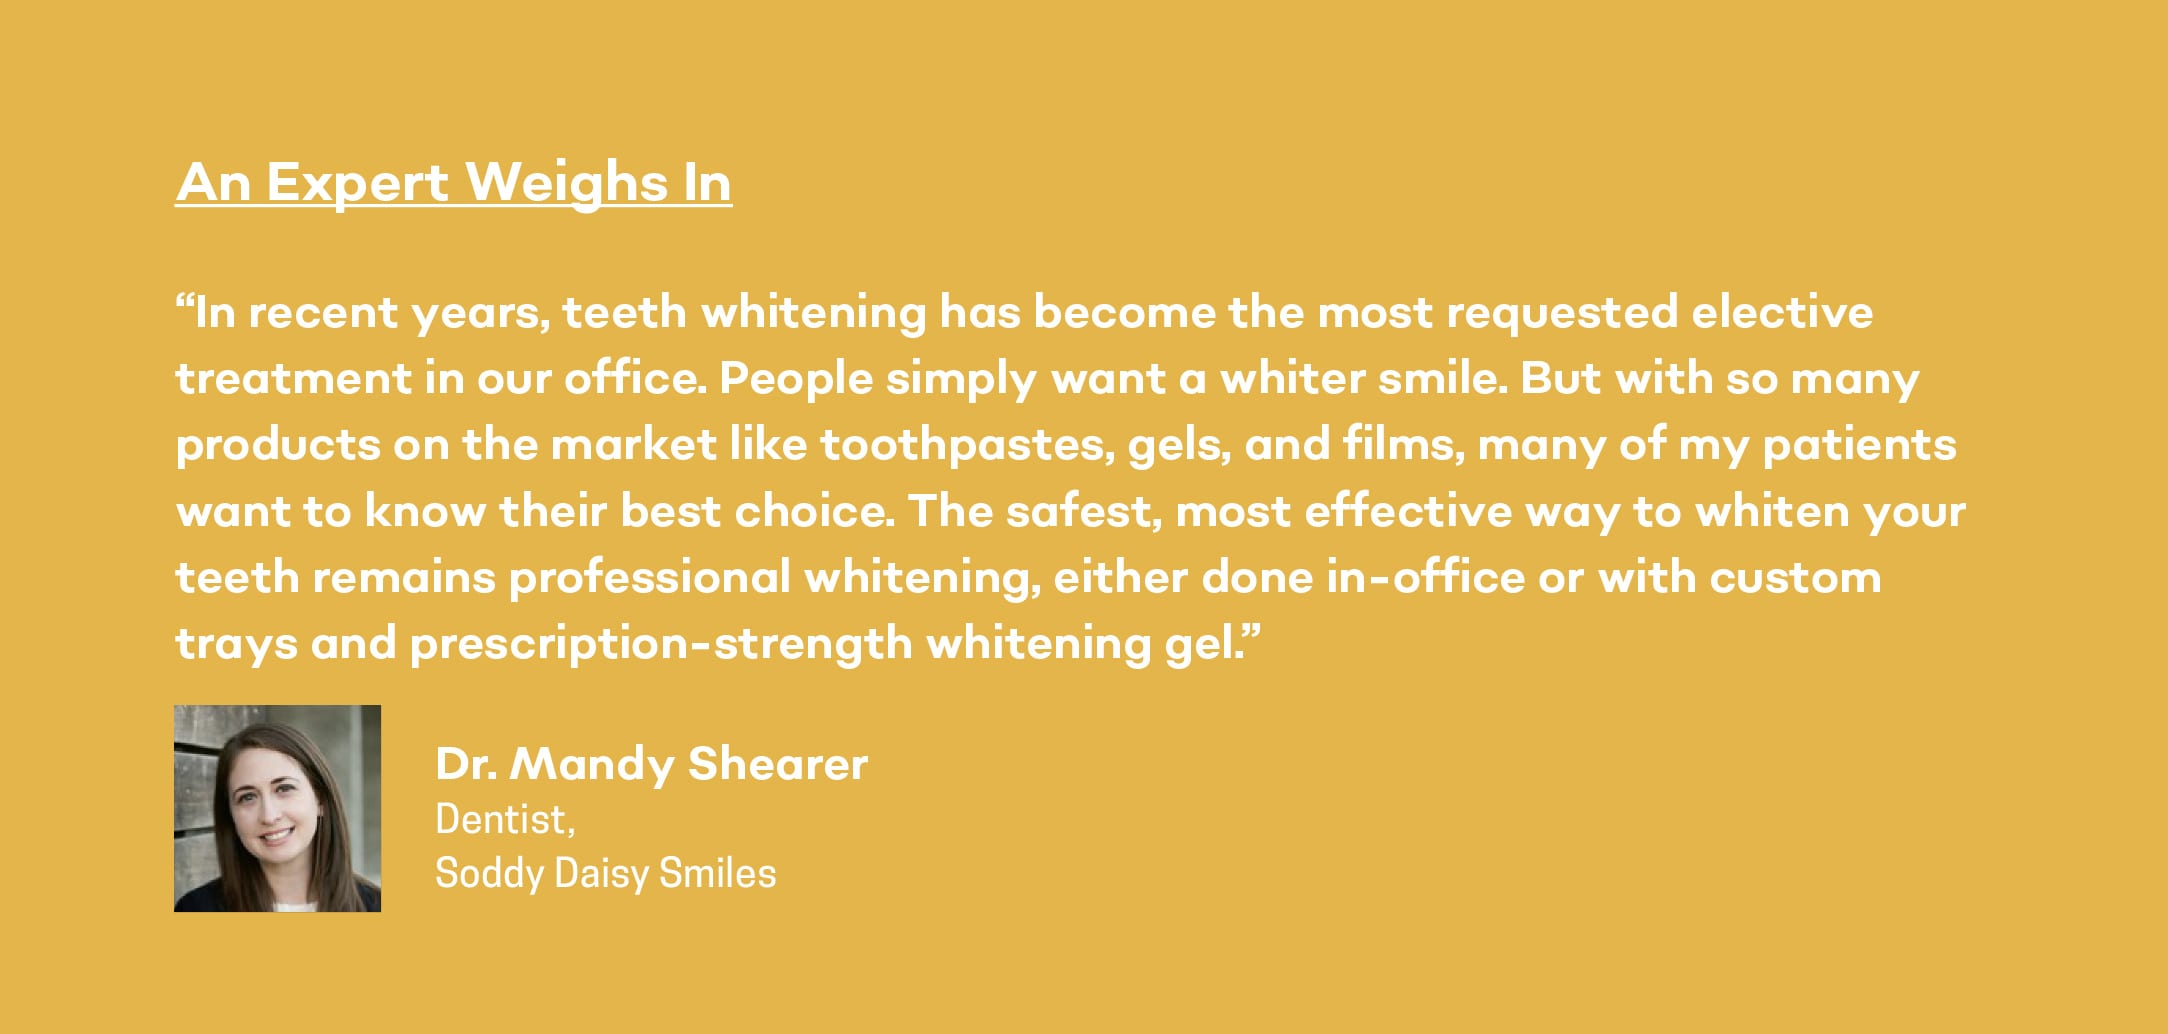 expert opinion about teeth whitening from Dr. Mandy Shearer in chattanooga